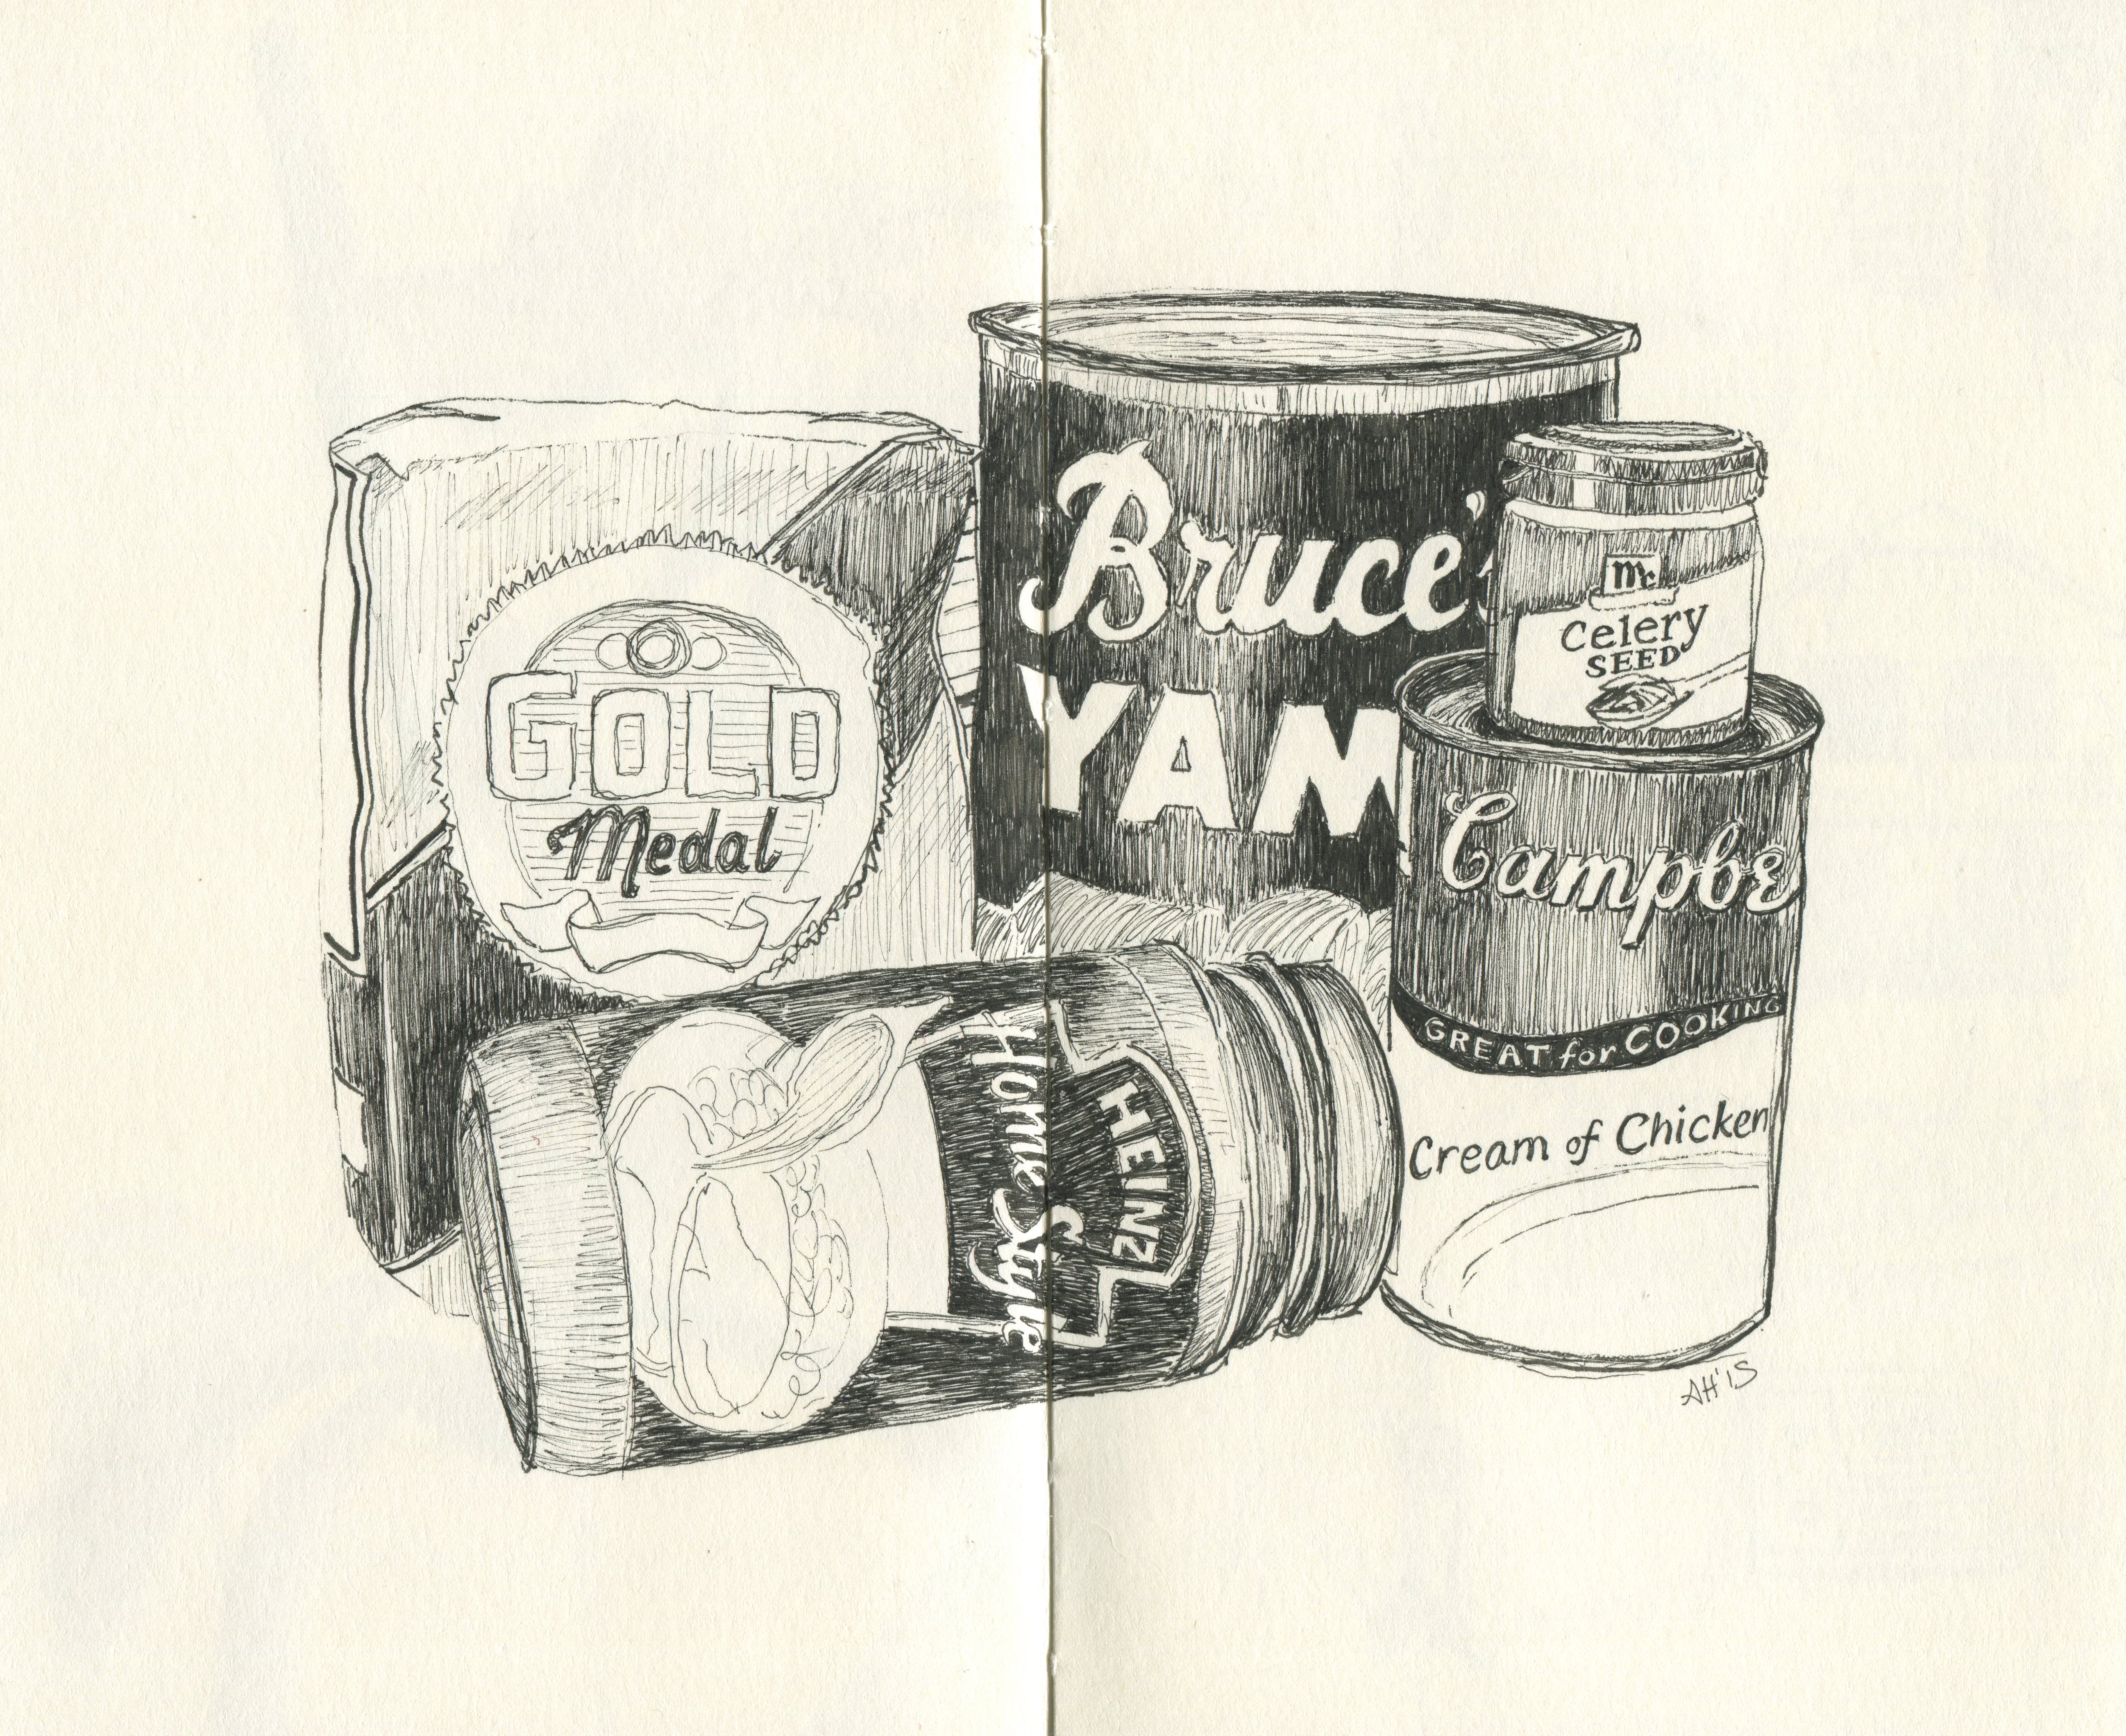 a sketch of gold medal flour, bruce's yams, heinz home style turkey gravy, campbell's cream of chicken soup, and mccormick's celery seed by alleanna harris